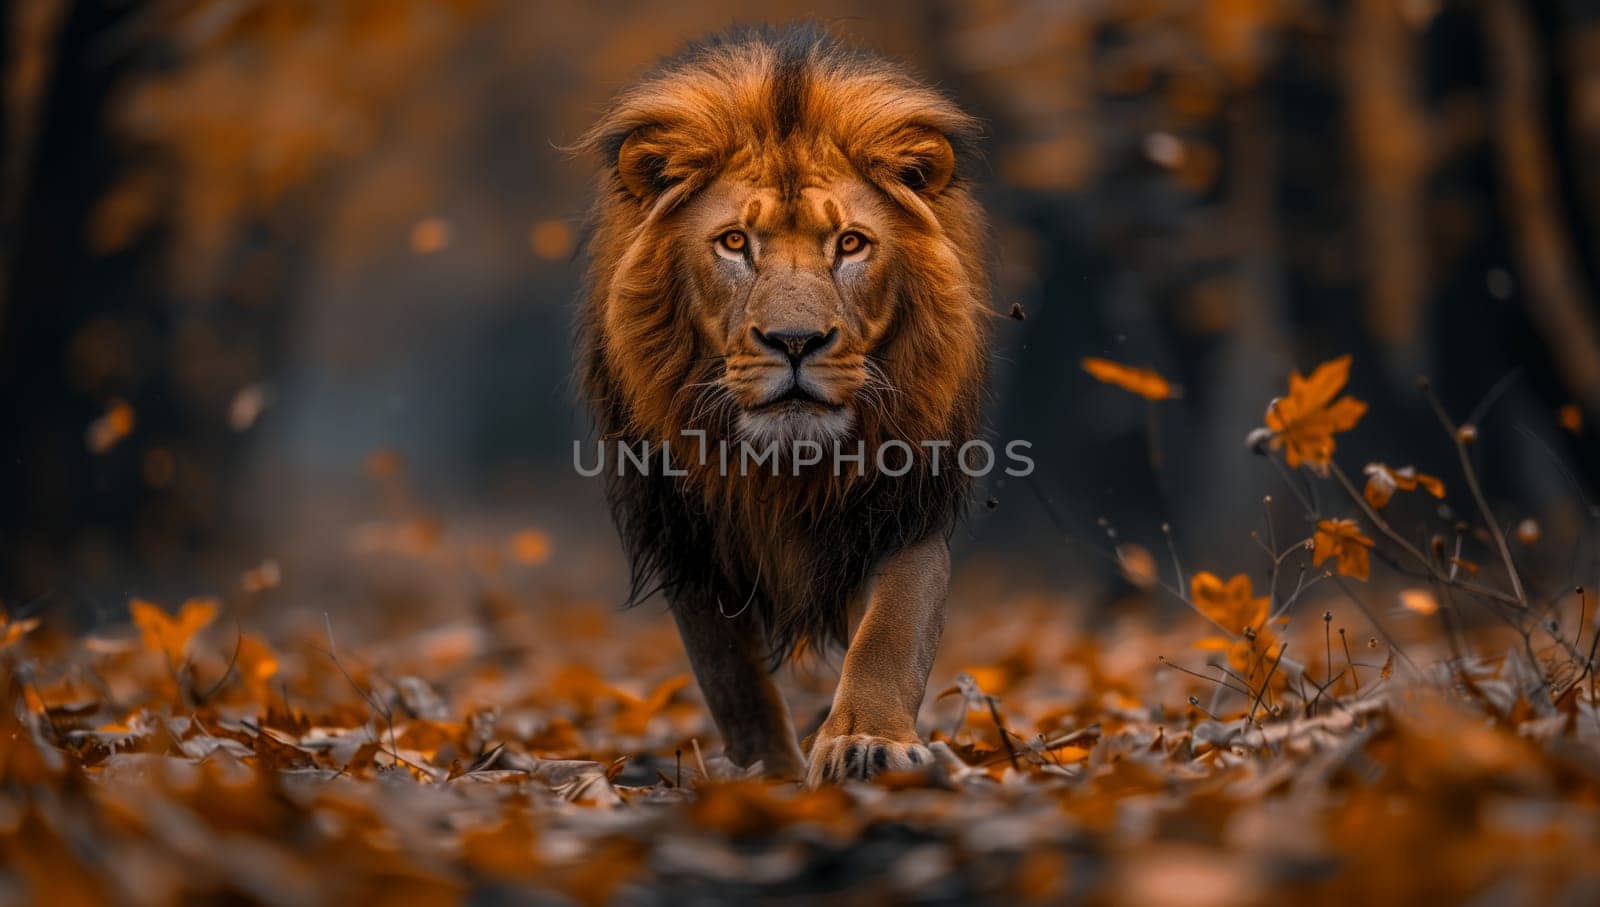 a lion is walking through a forest of leaves by richwolf